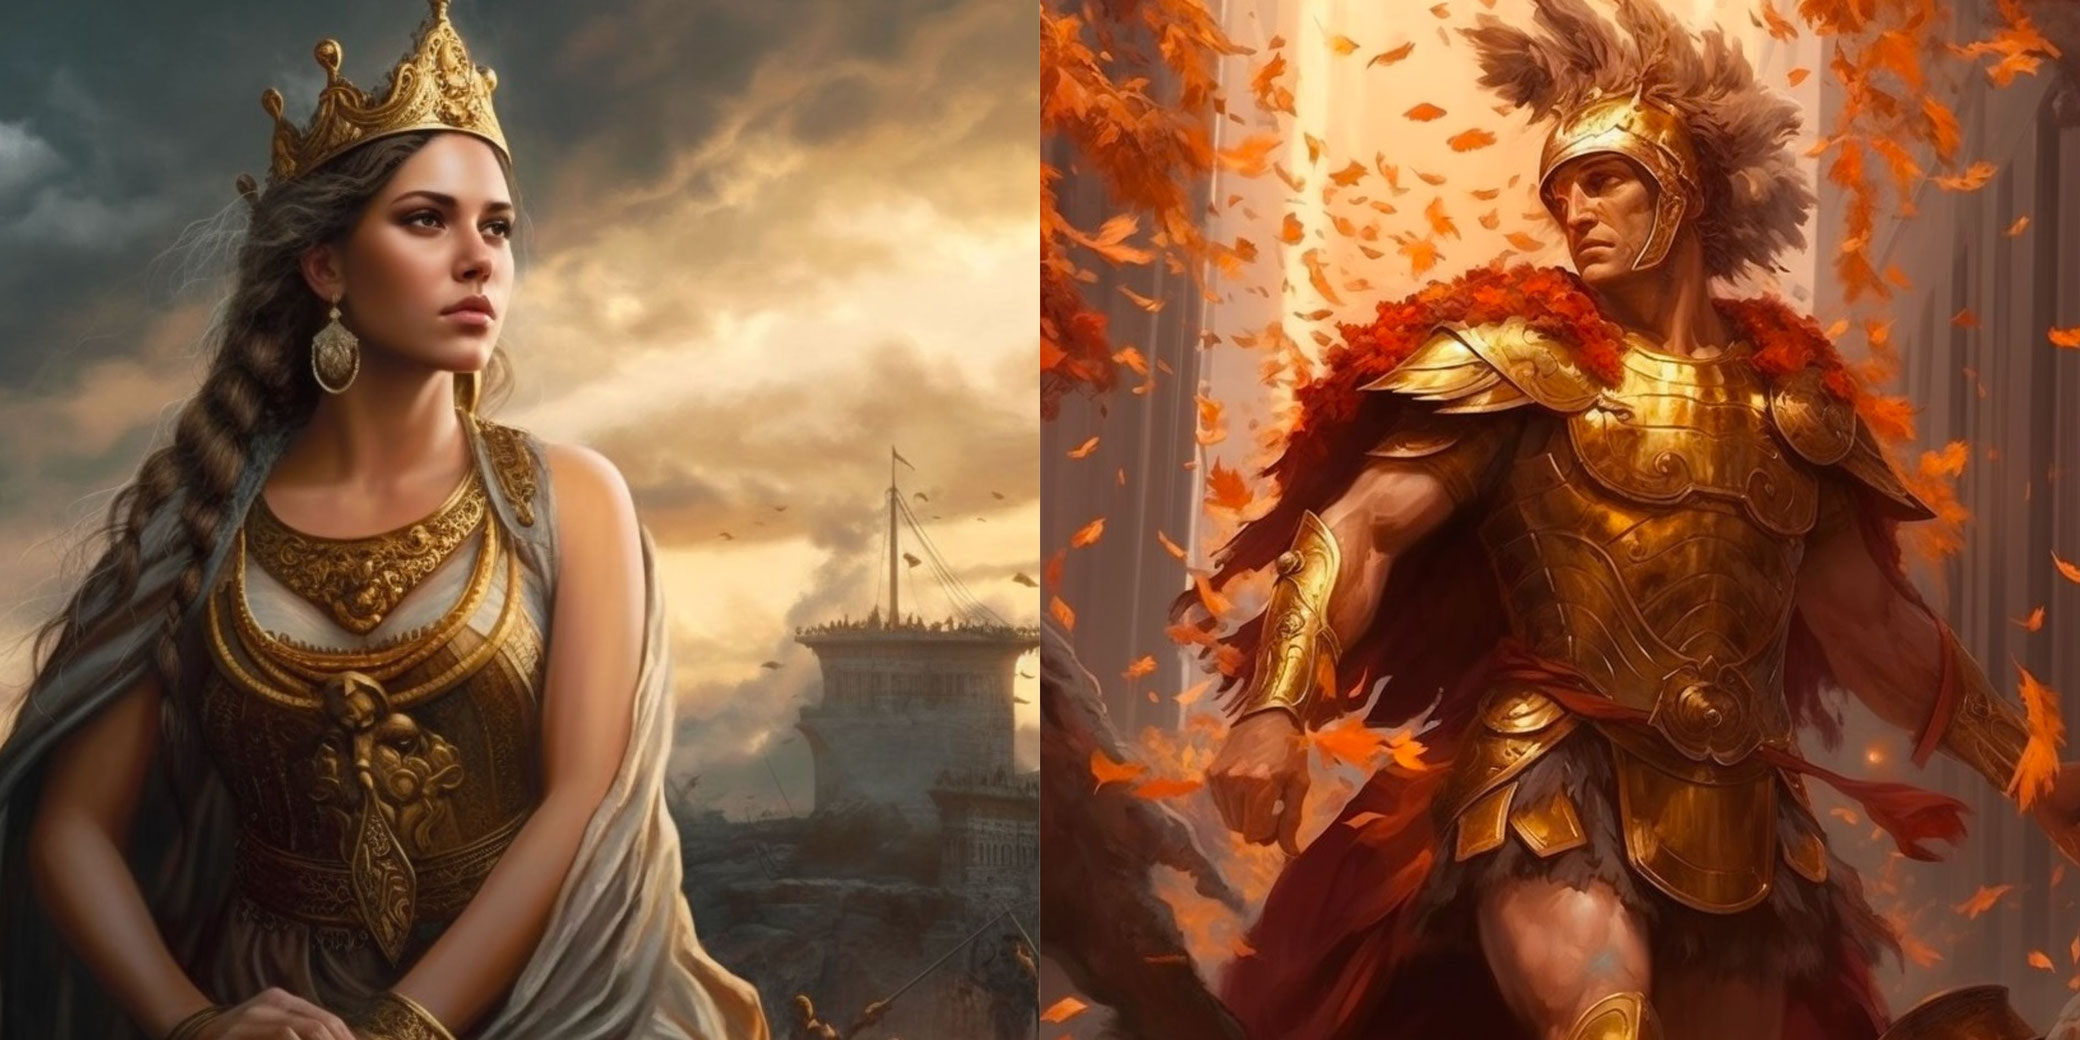 Aeneas and Dido: The tragic love story at the dawn of Rome's history